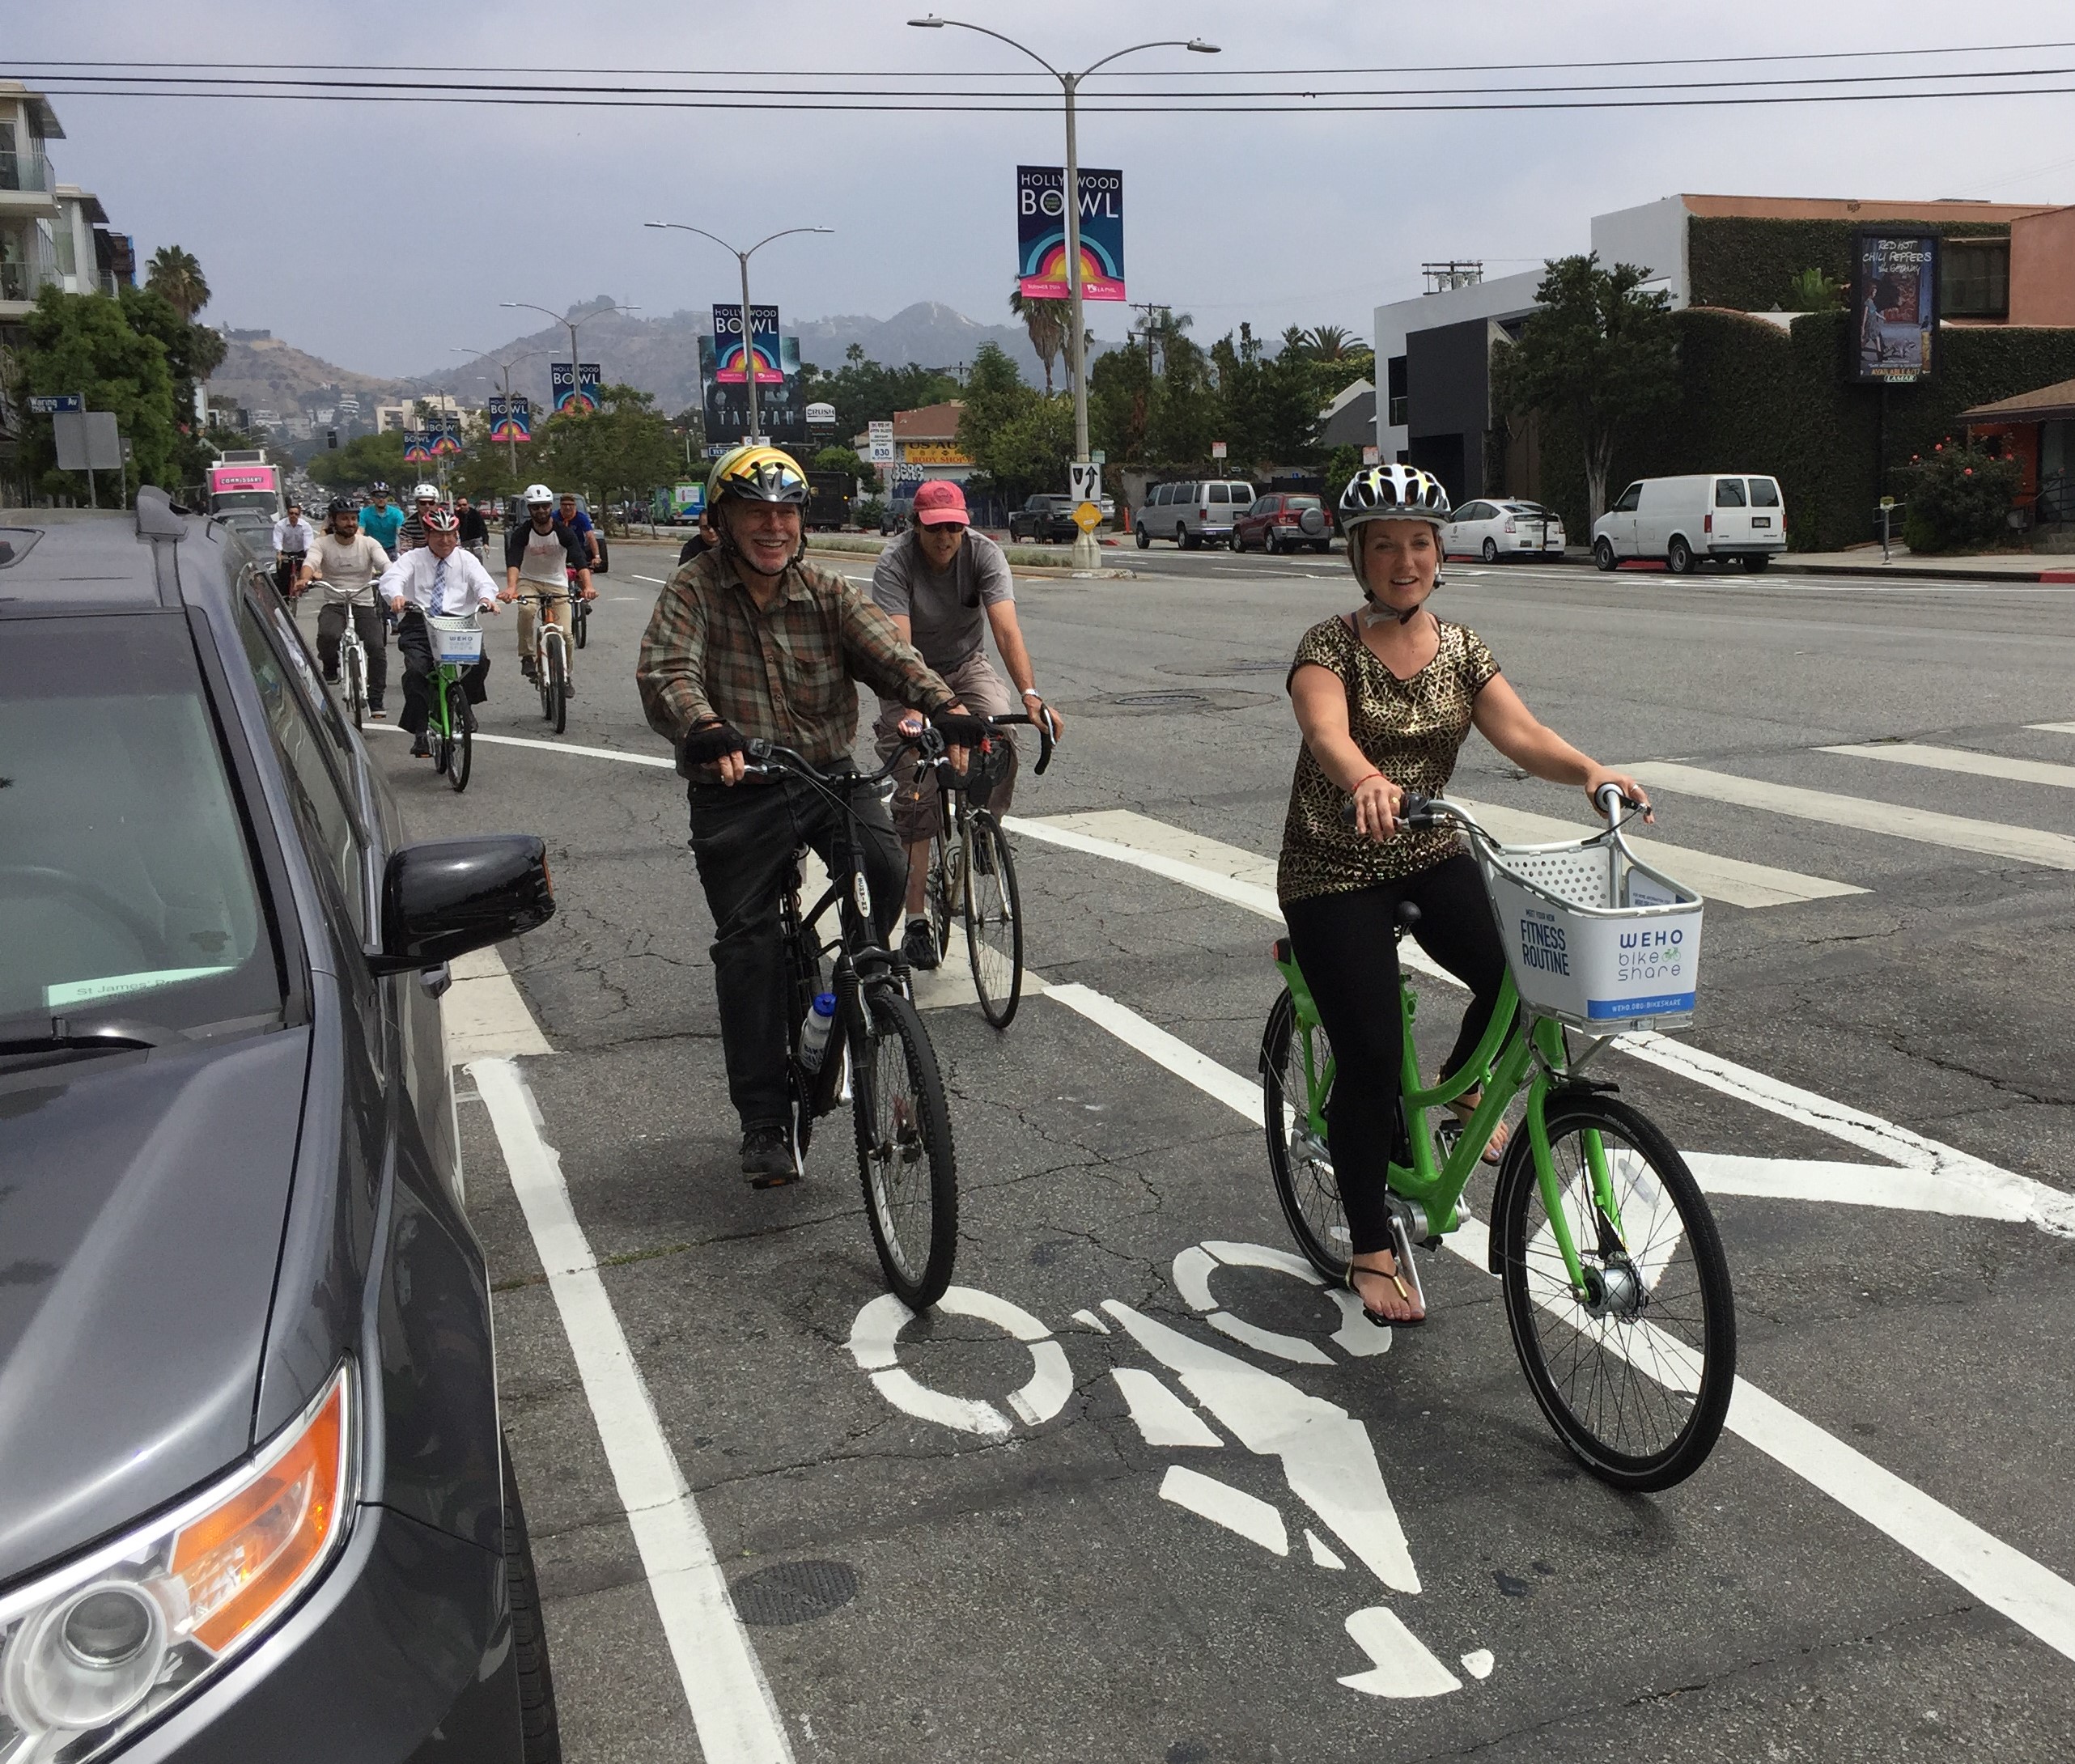 West Hollywood councilmember Linsey Horvath demonstrates a WeHo Pedals bike. Photo: Joe Linton/Streetsblog L.A.